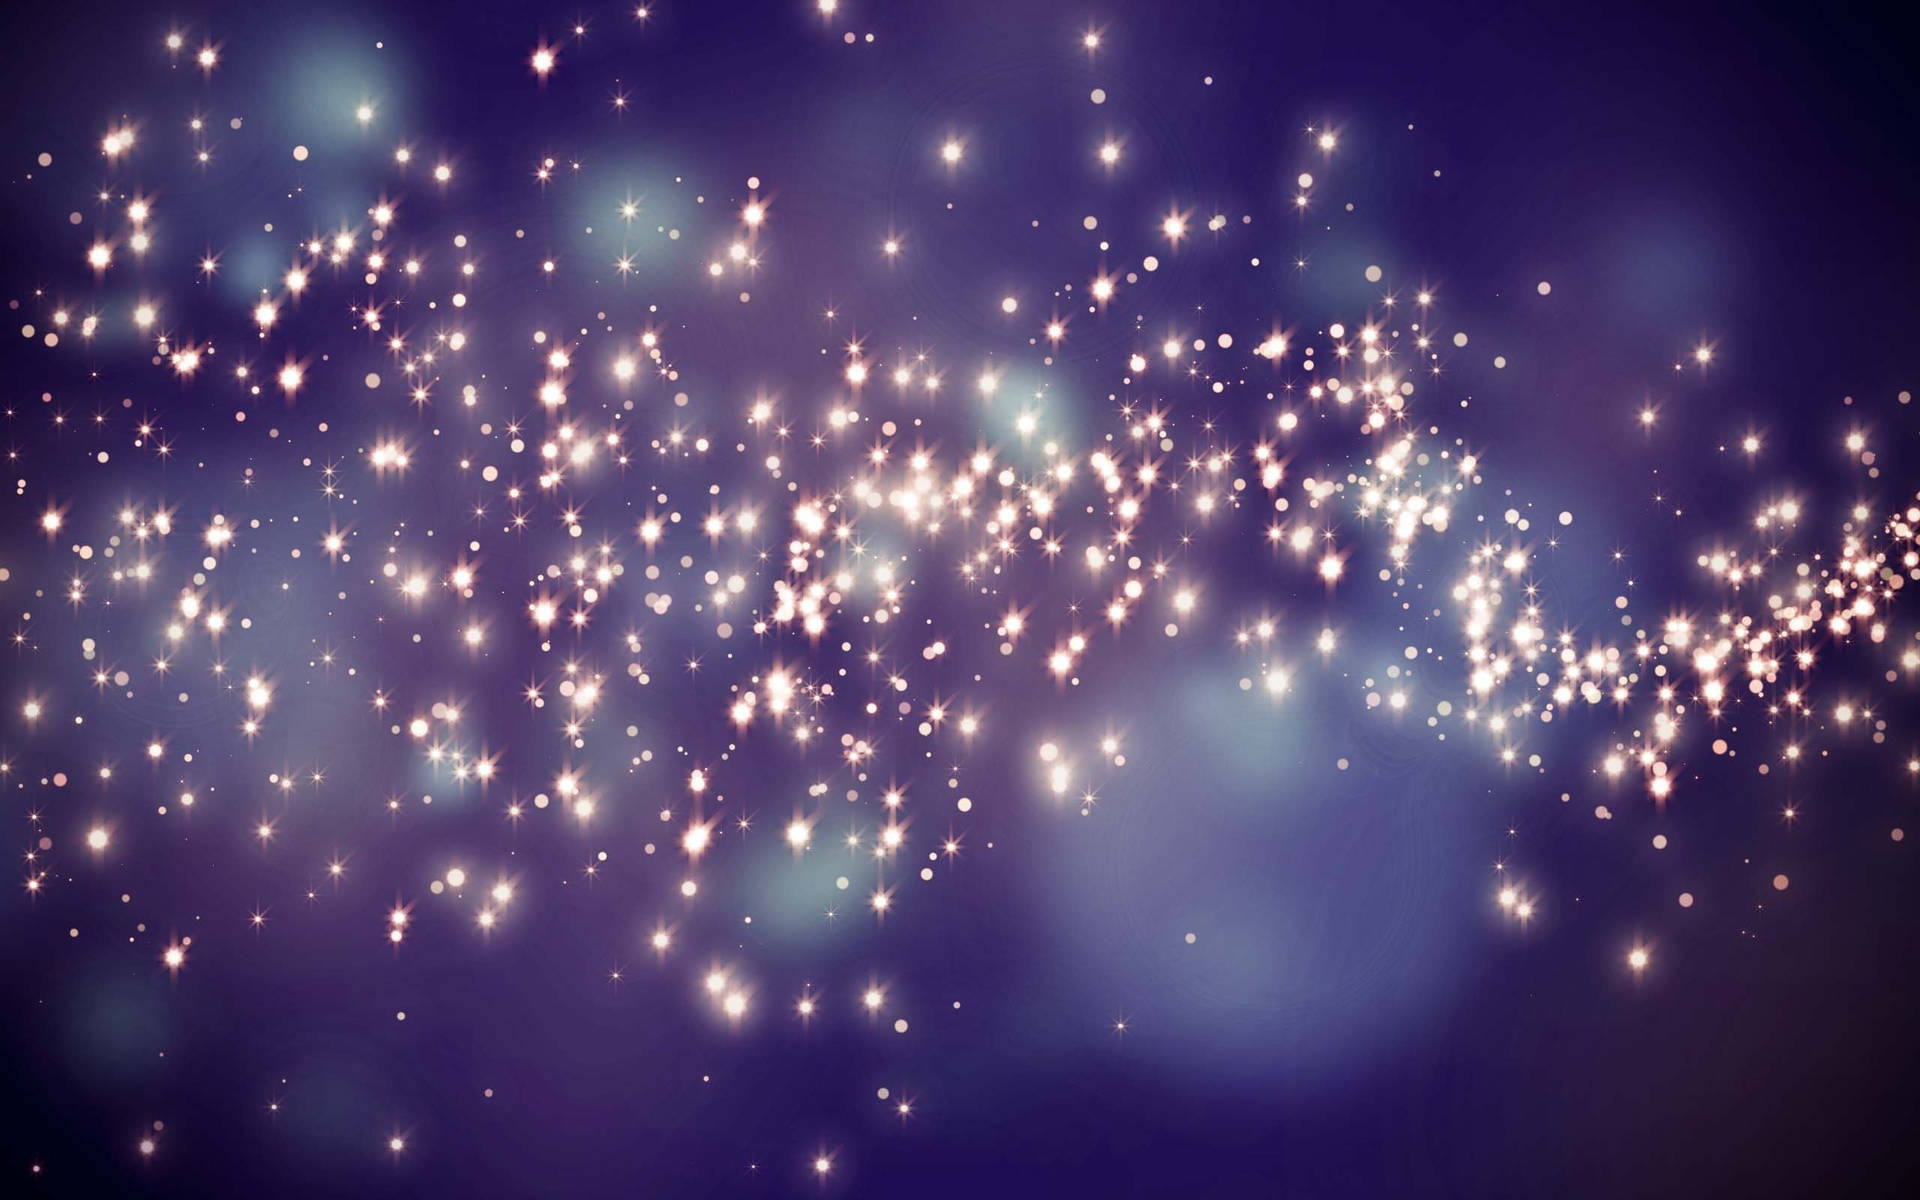 Add a Touch of Sparkle to Your Desktop Wallpaper